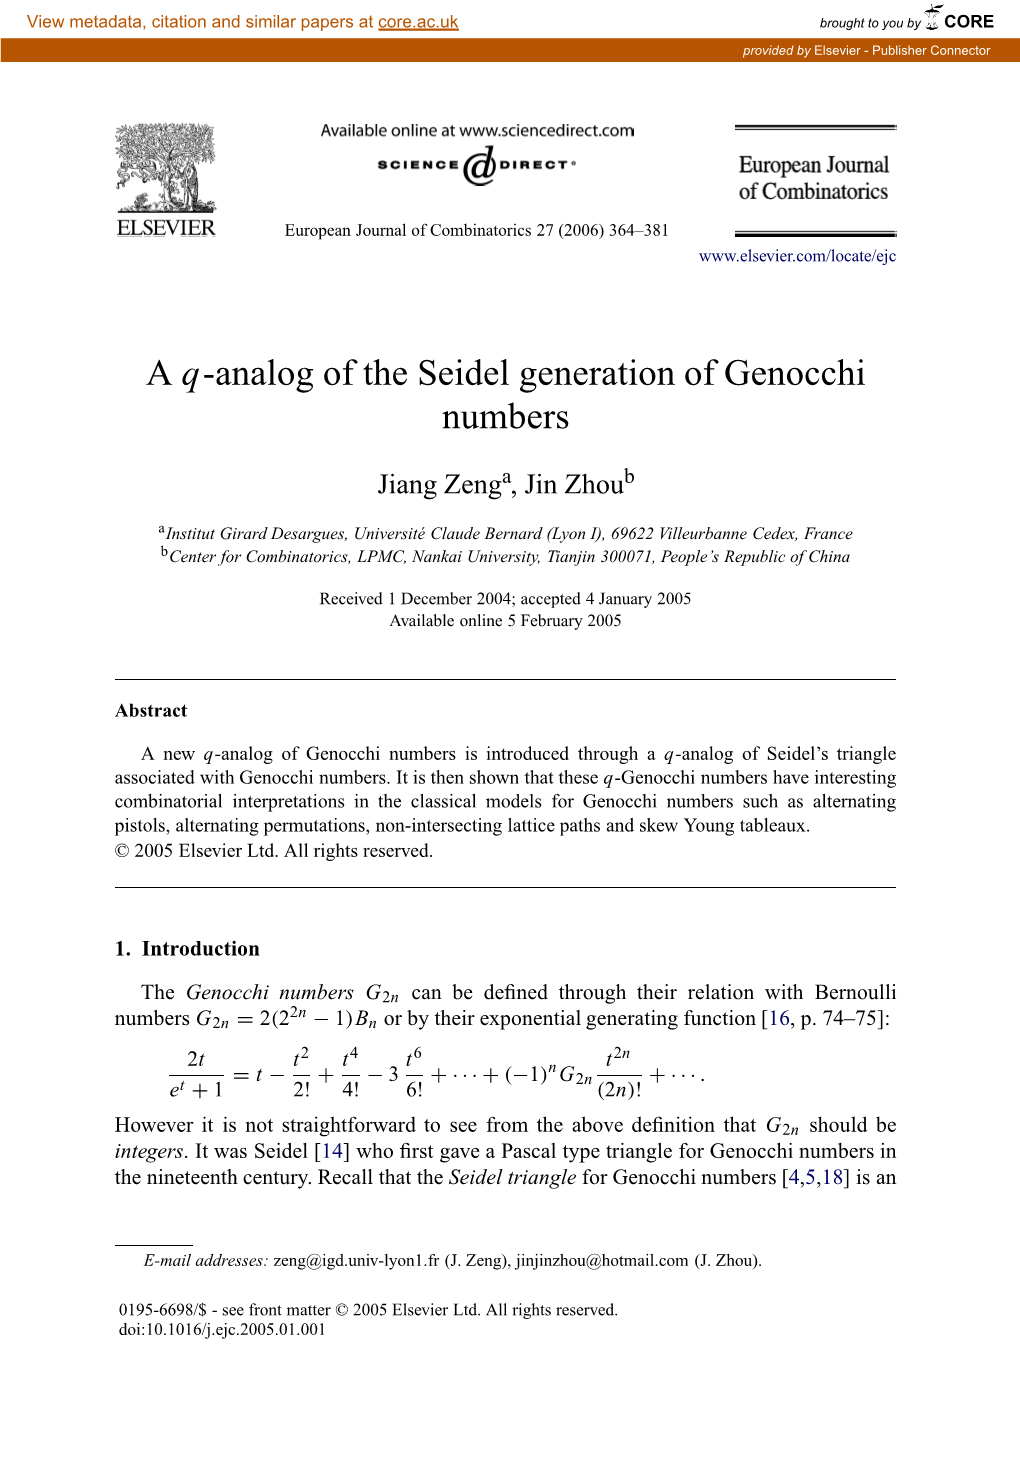 A Q-Analog of the Seidel Generation of Genocchi Numbers